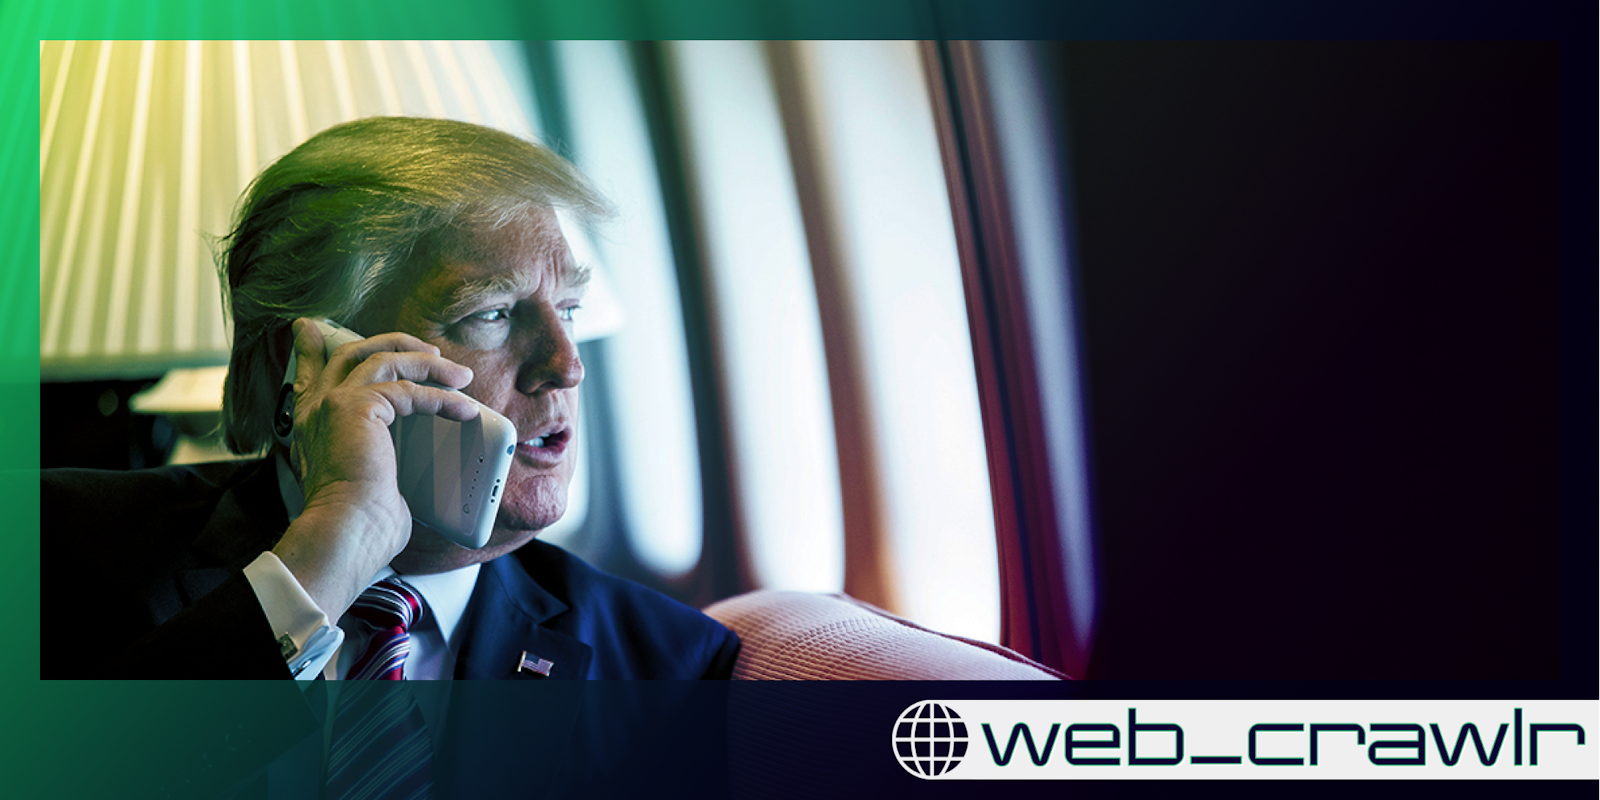 Trump talking on a phone. The Daily Dot newsletter web_crawlr logo is in the bottom right corner.